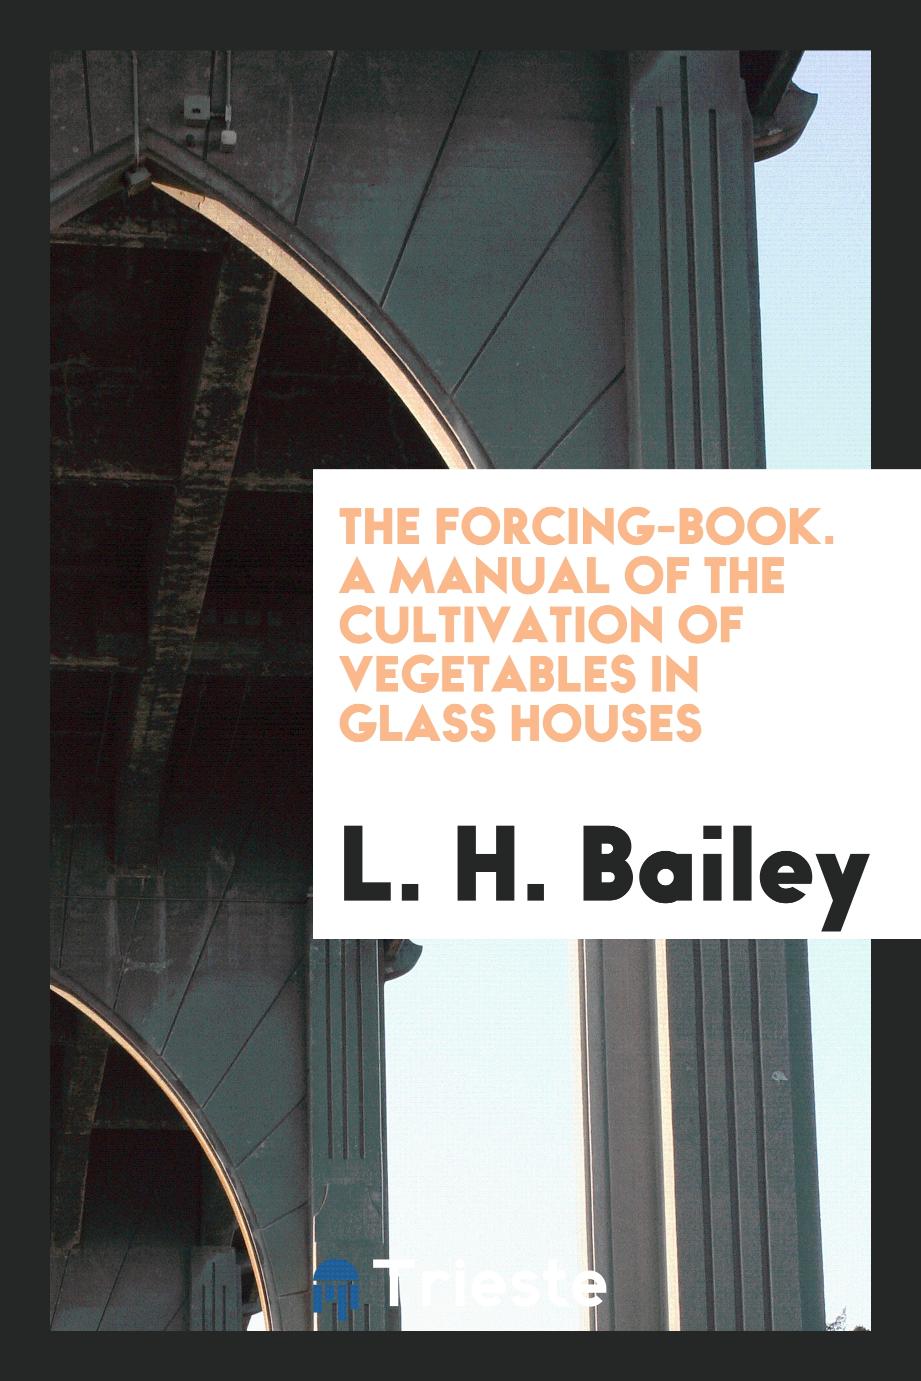 The Forcing-Book. A Manual of the Cultivation of Vegetables in Glass Houses